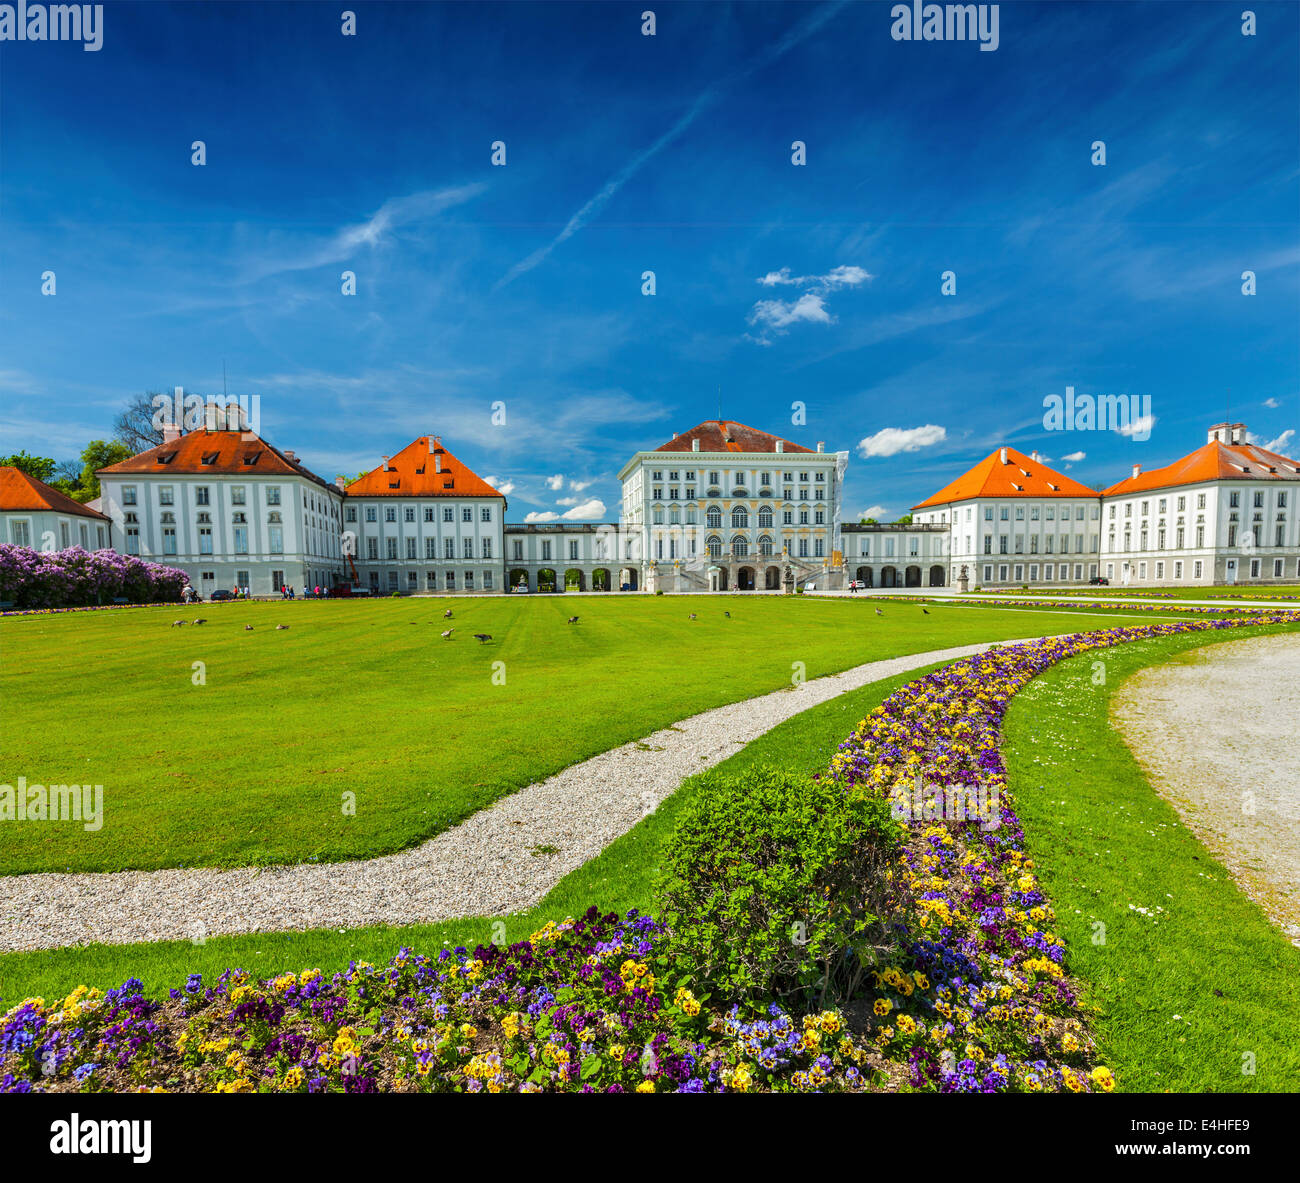 Flower garden in front of the Nymphenburg Palace. Munich, Bavaria, Germany Stock Photo